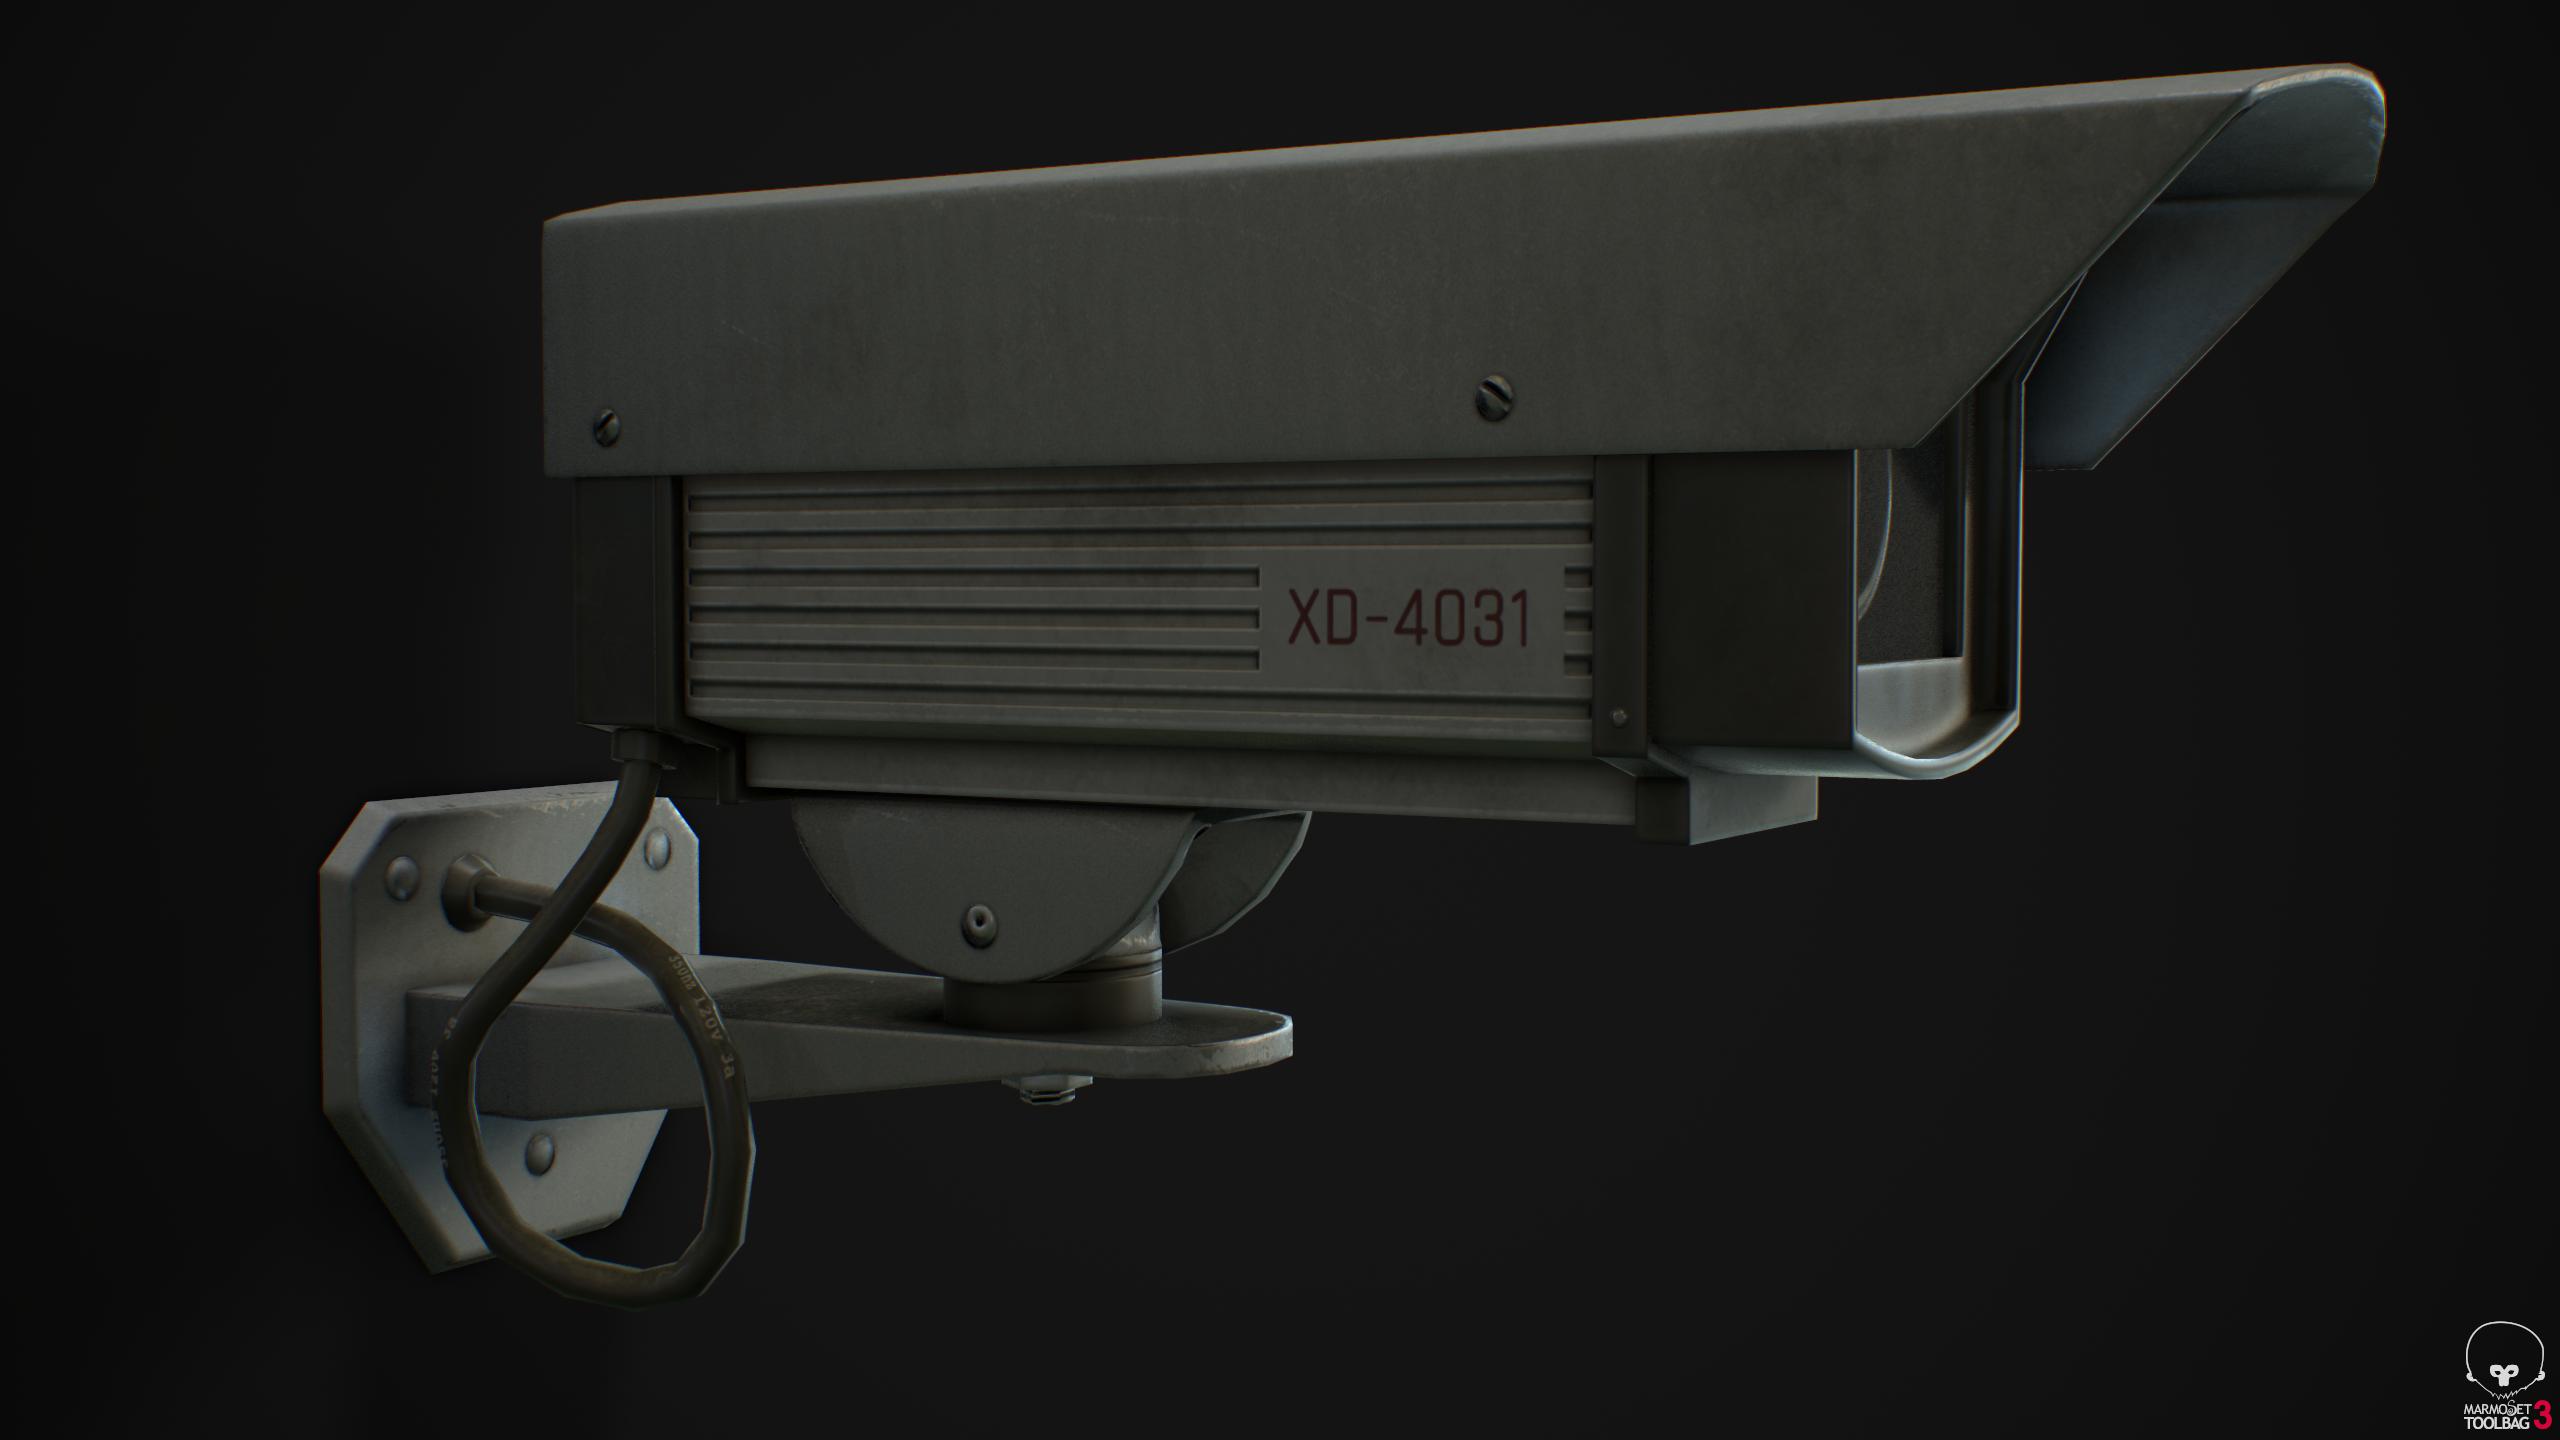 Render of a security camera